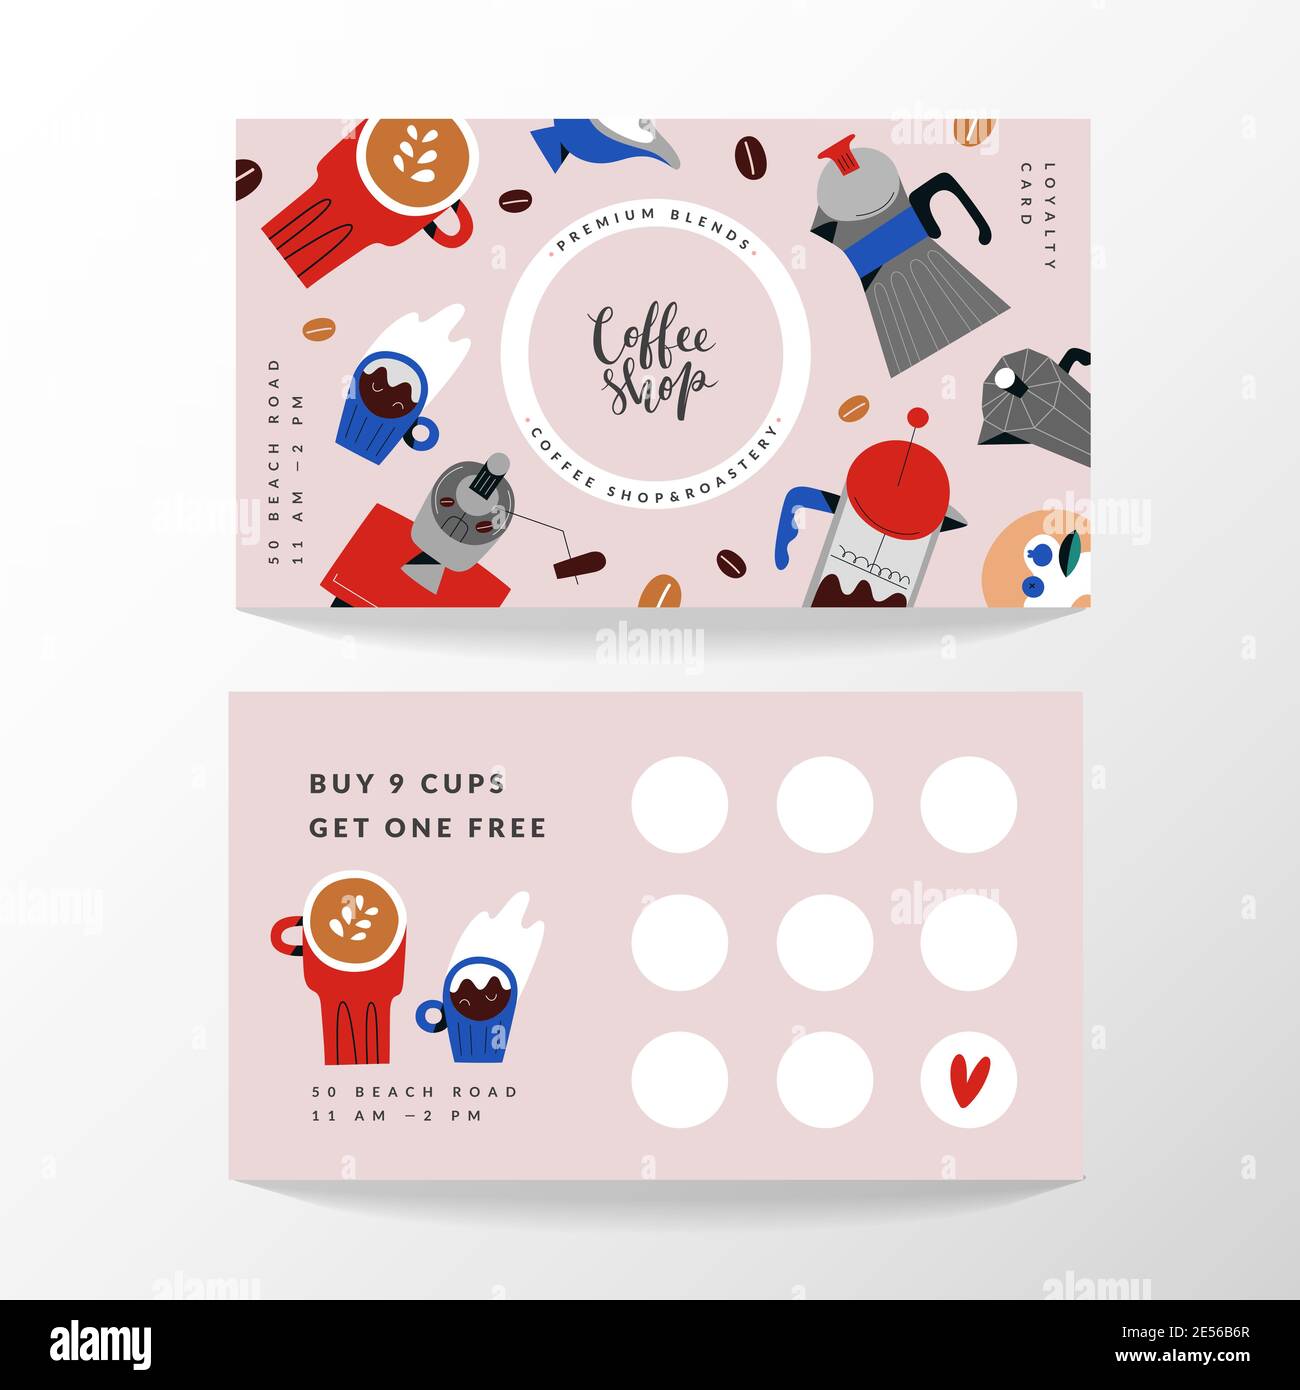 Coffee shop card, loyalty card template for cafe or coffee shop. Place for stamps. Layout with hand drawn illustrations of coffee mugs and brewing Stock Vector